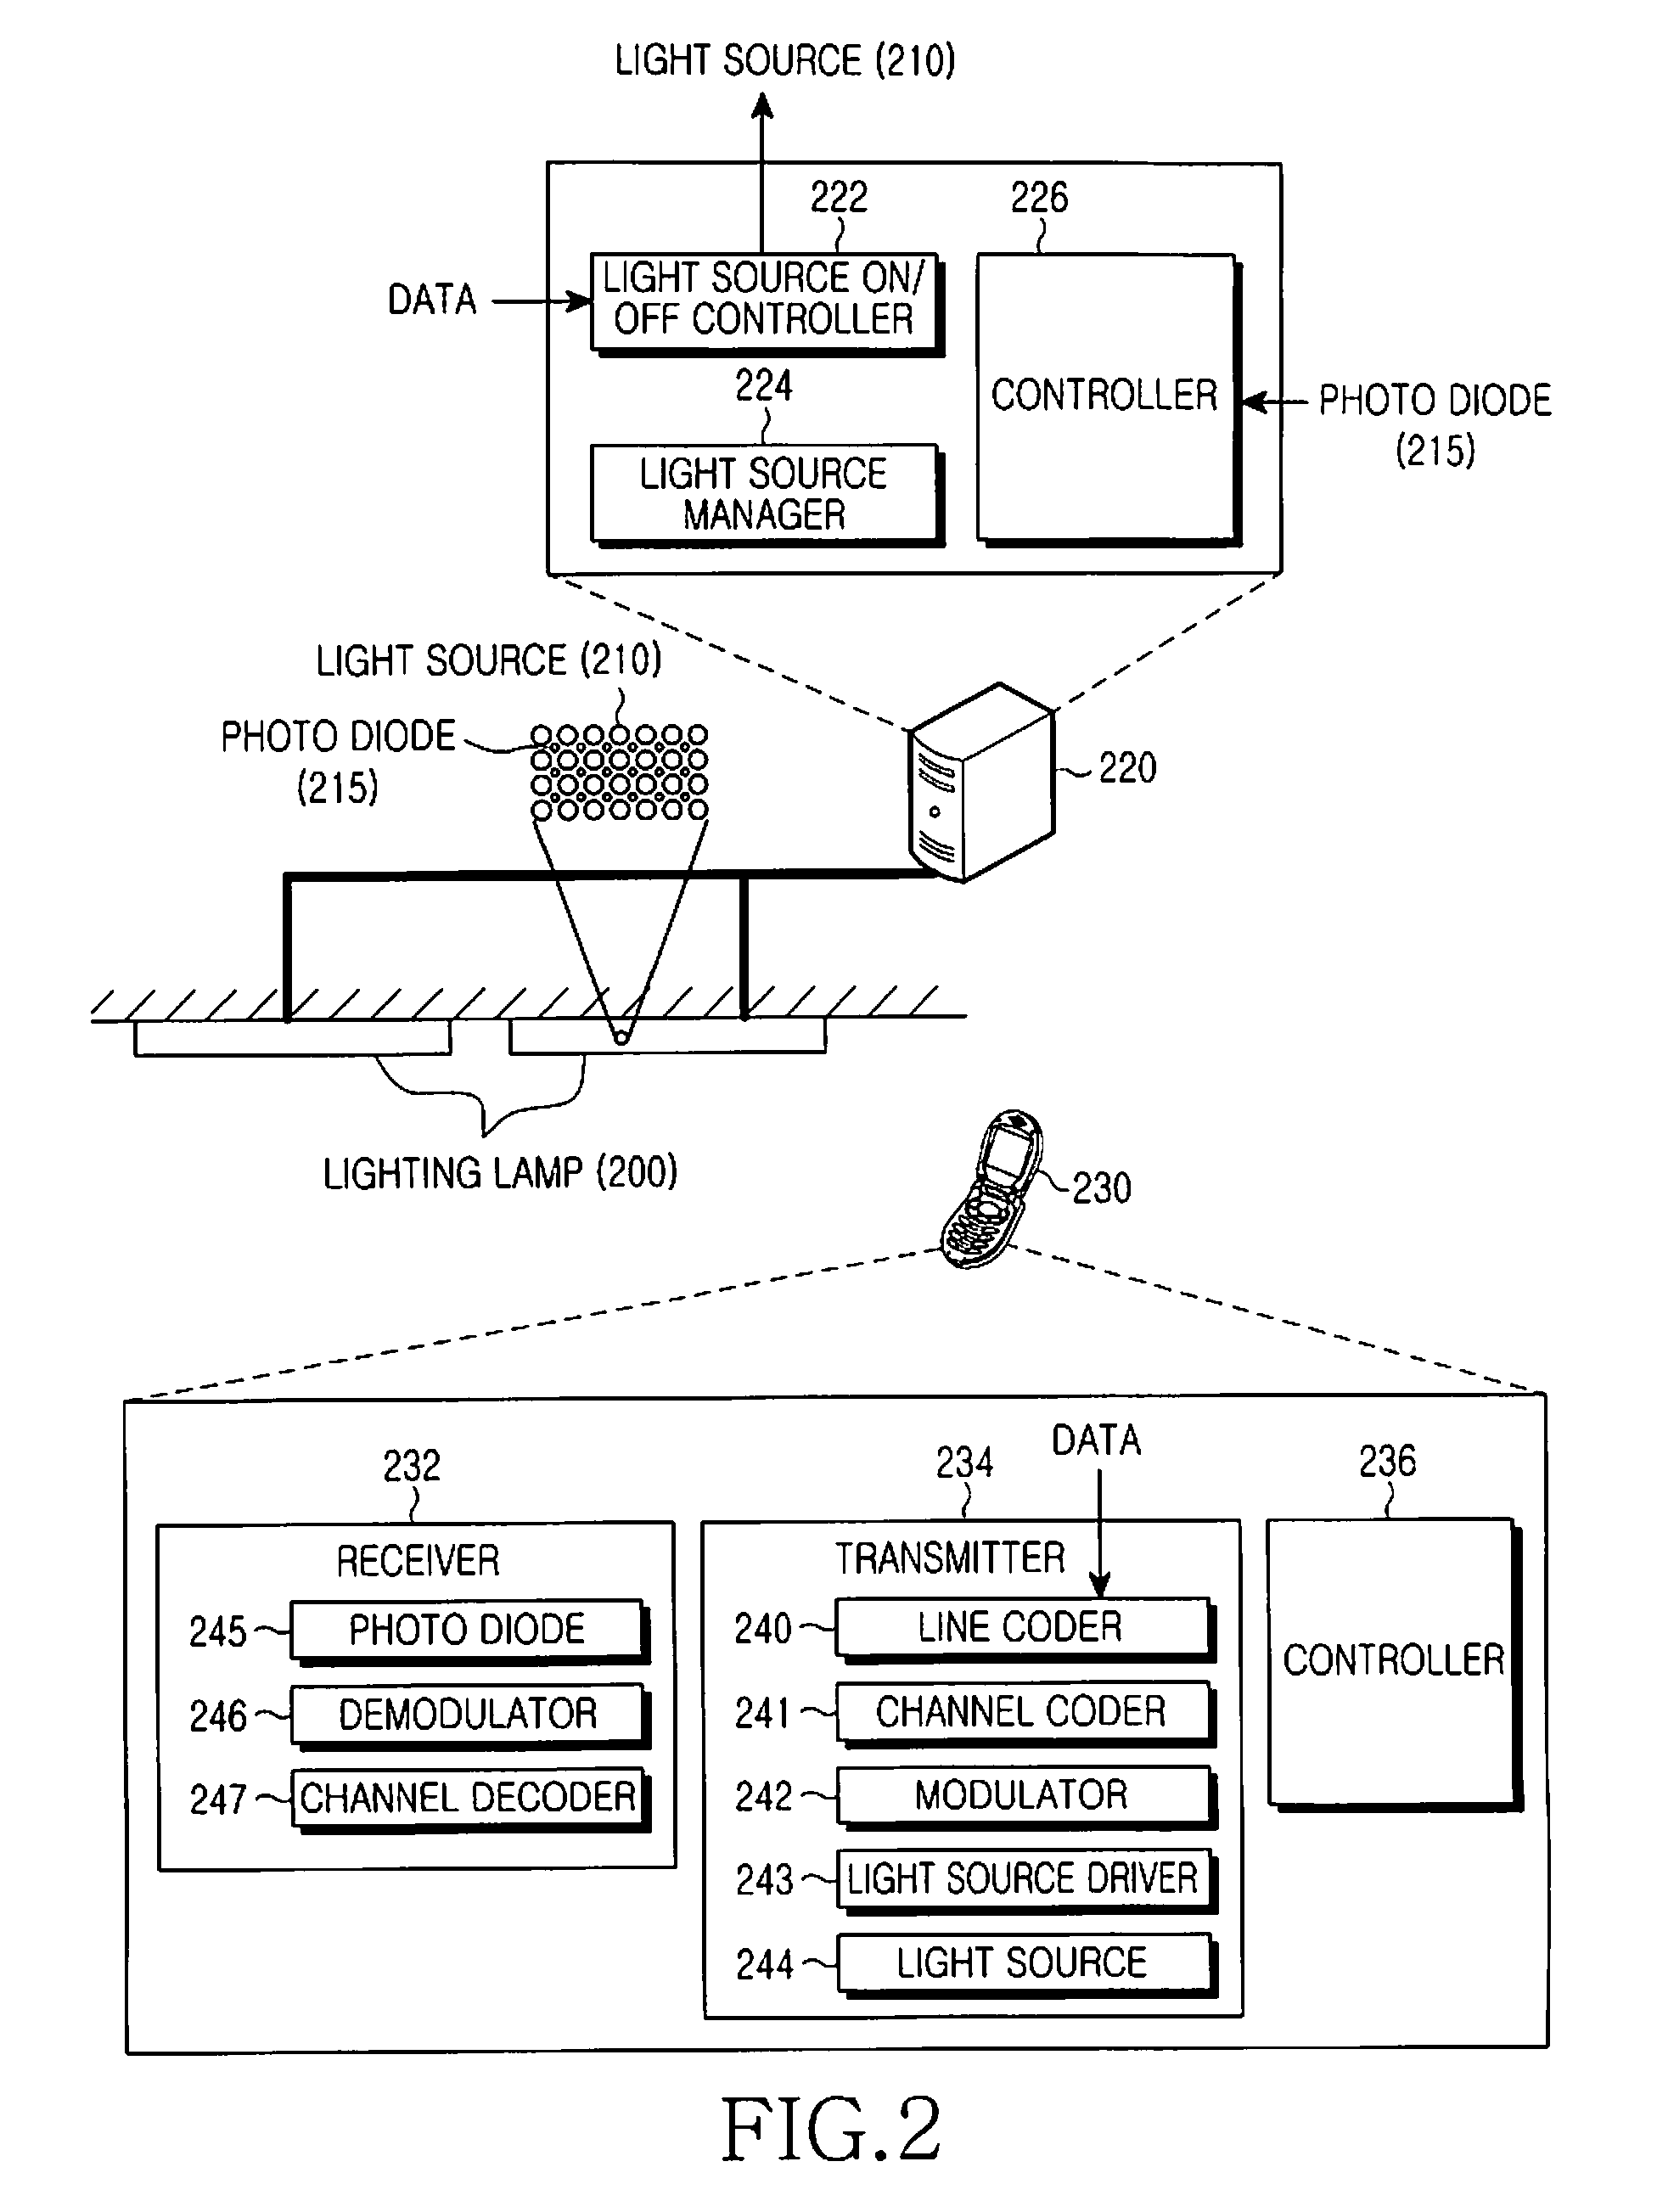 Apparatus and method for supporting mobility of a mobile terminal that performs visible light communication